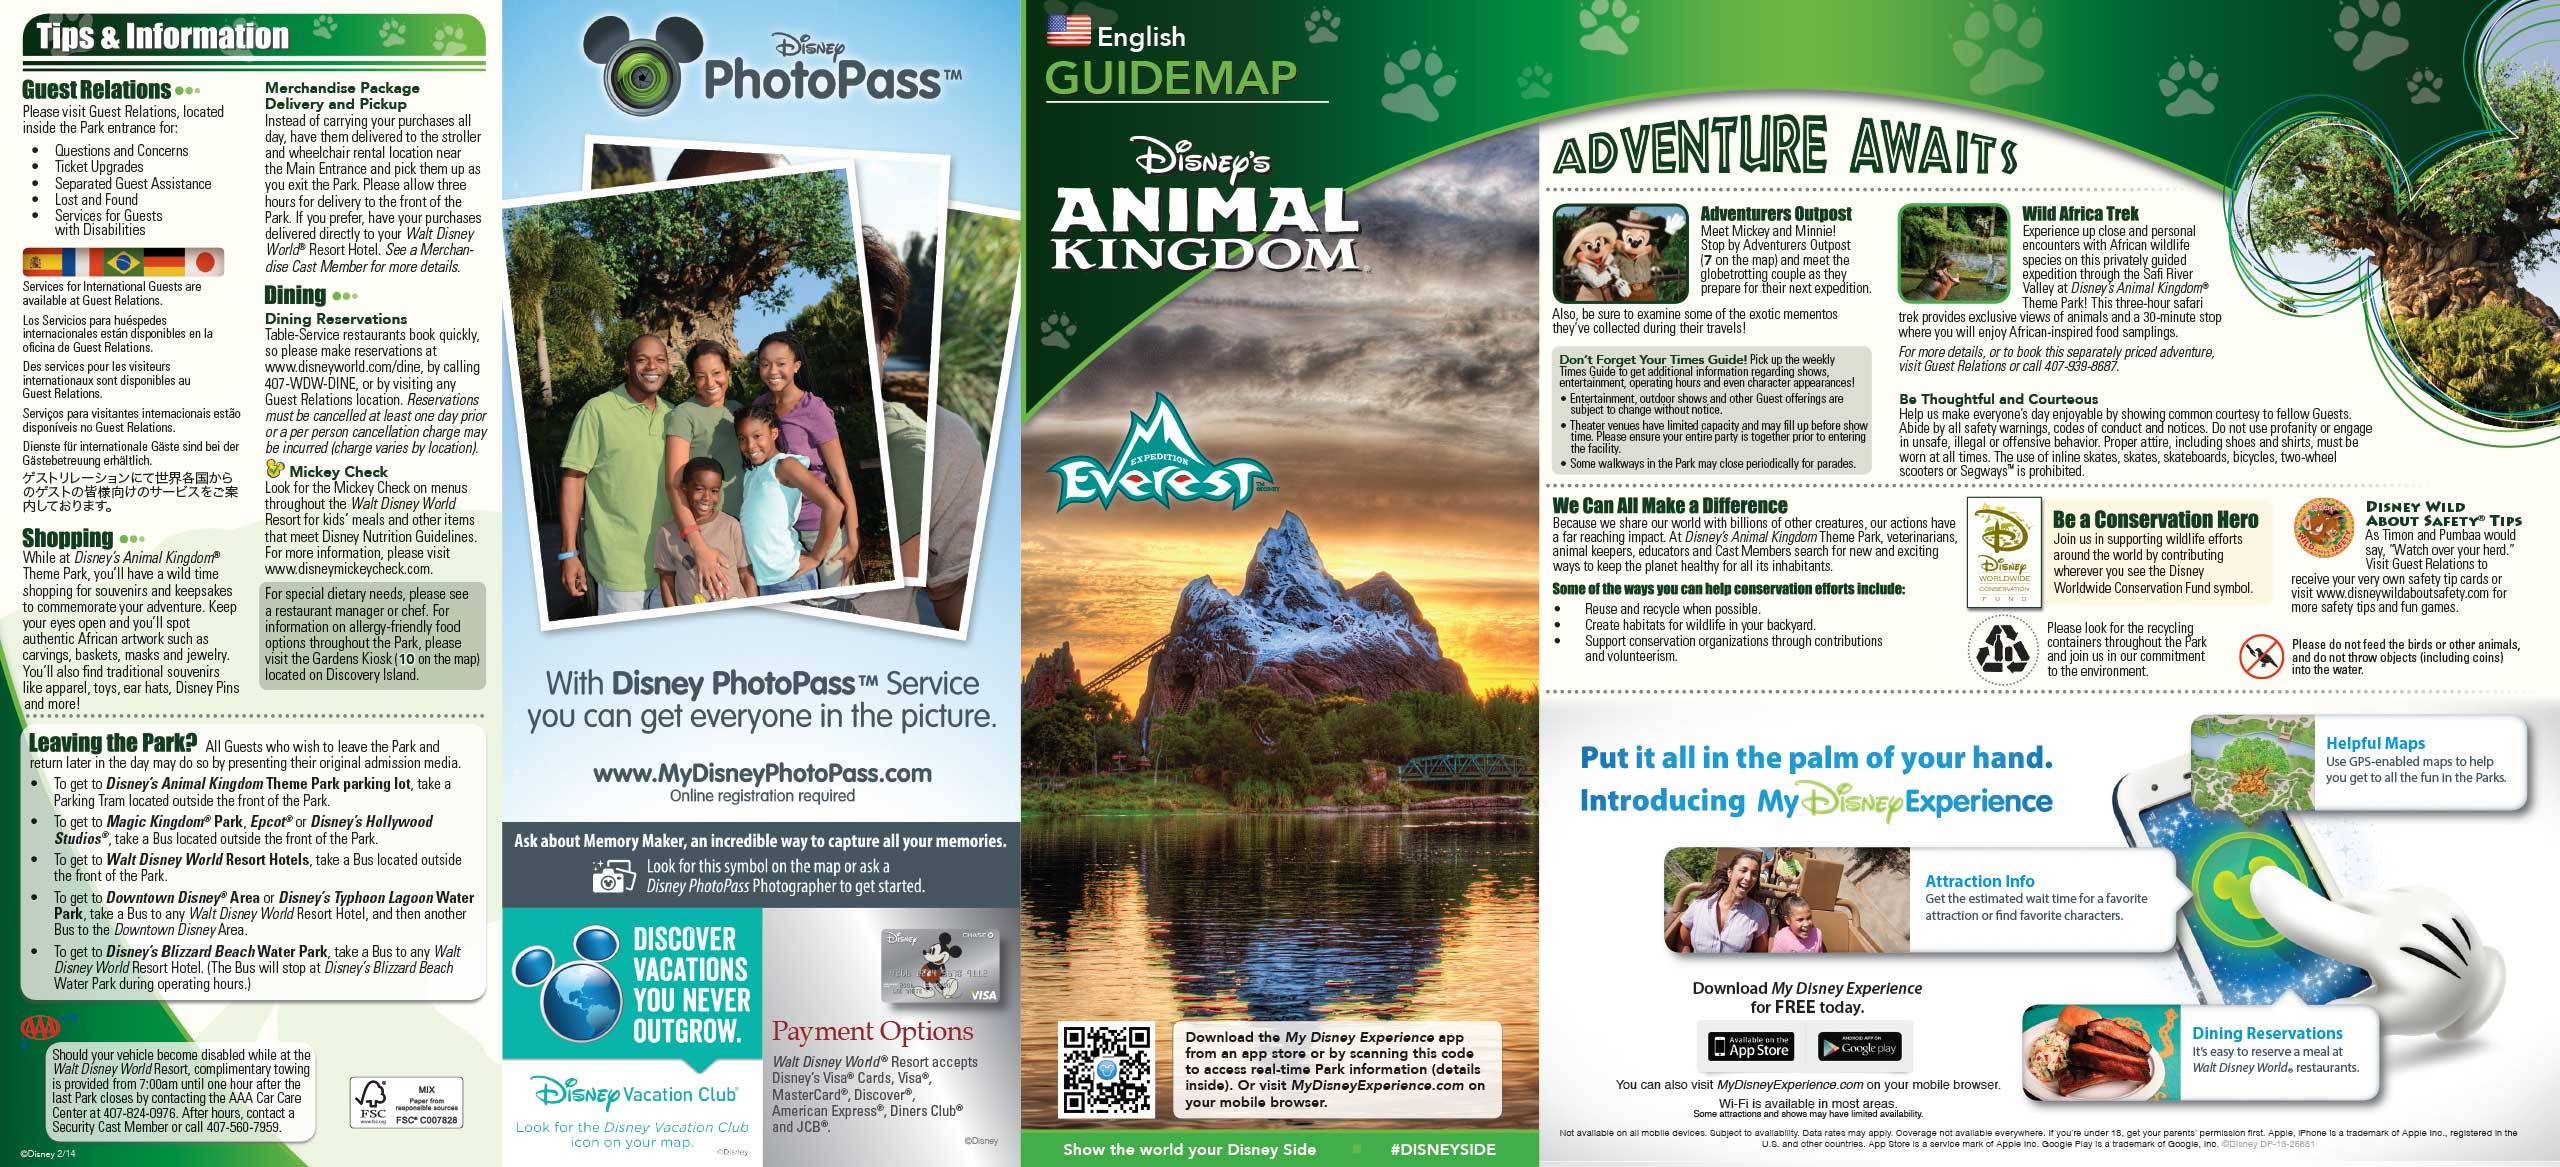 PHOTOS - Magic Kingdom and Disney's Animal Kingdom launch new guide maps updated for MyMagic+ and FastPass+